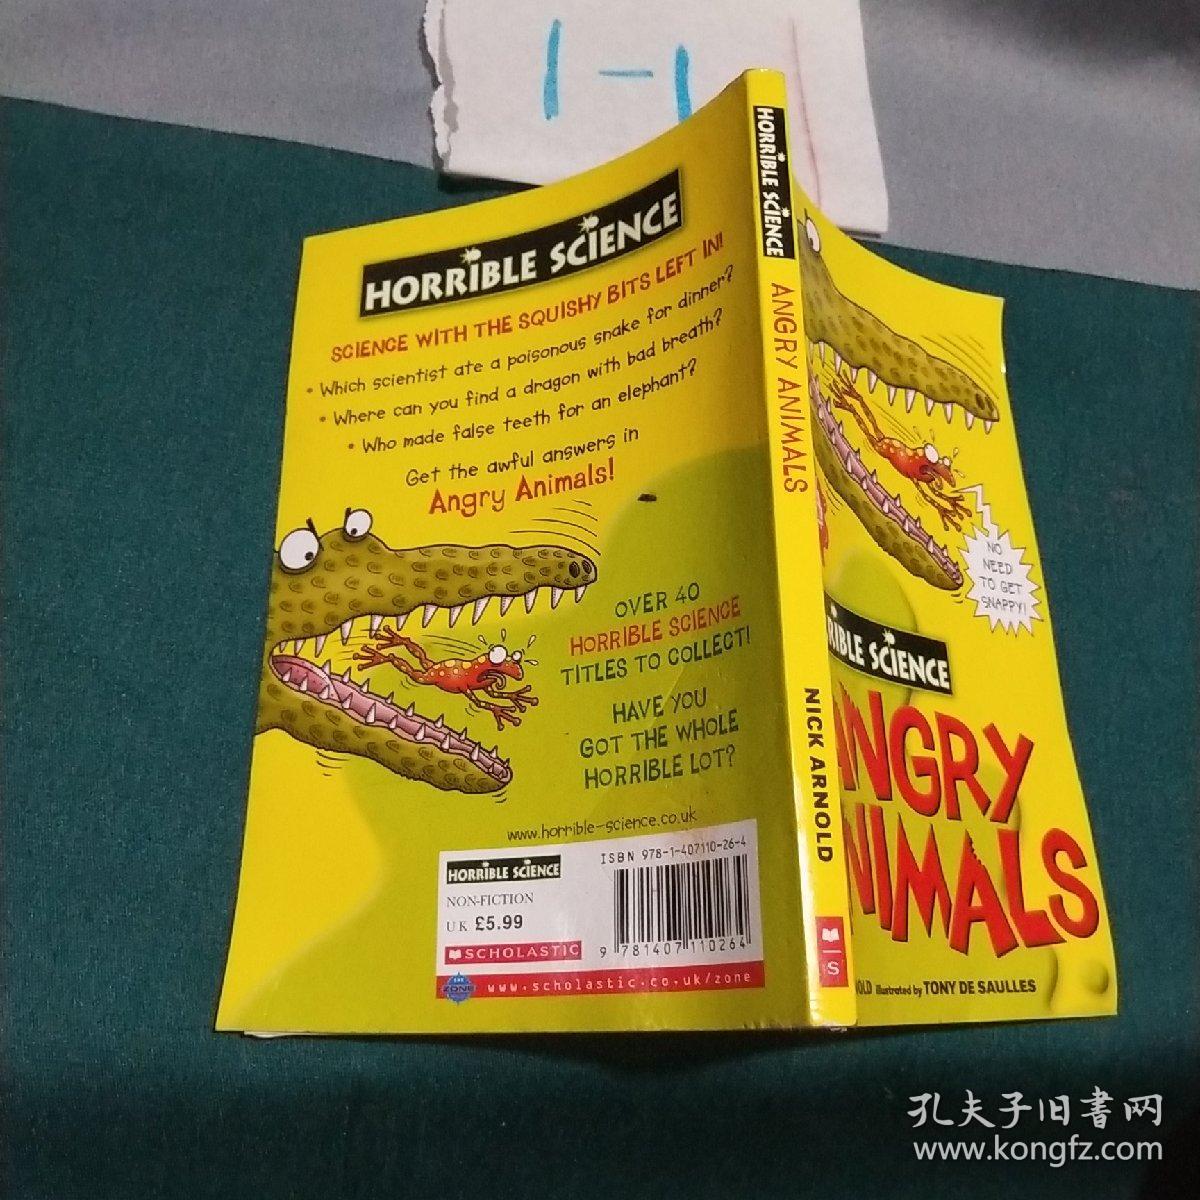 angry    animals  (Horrible Science)